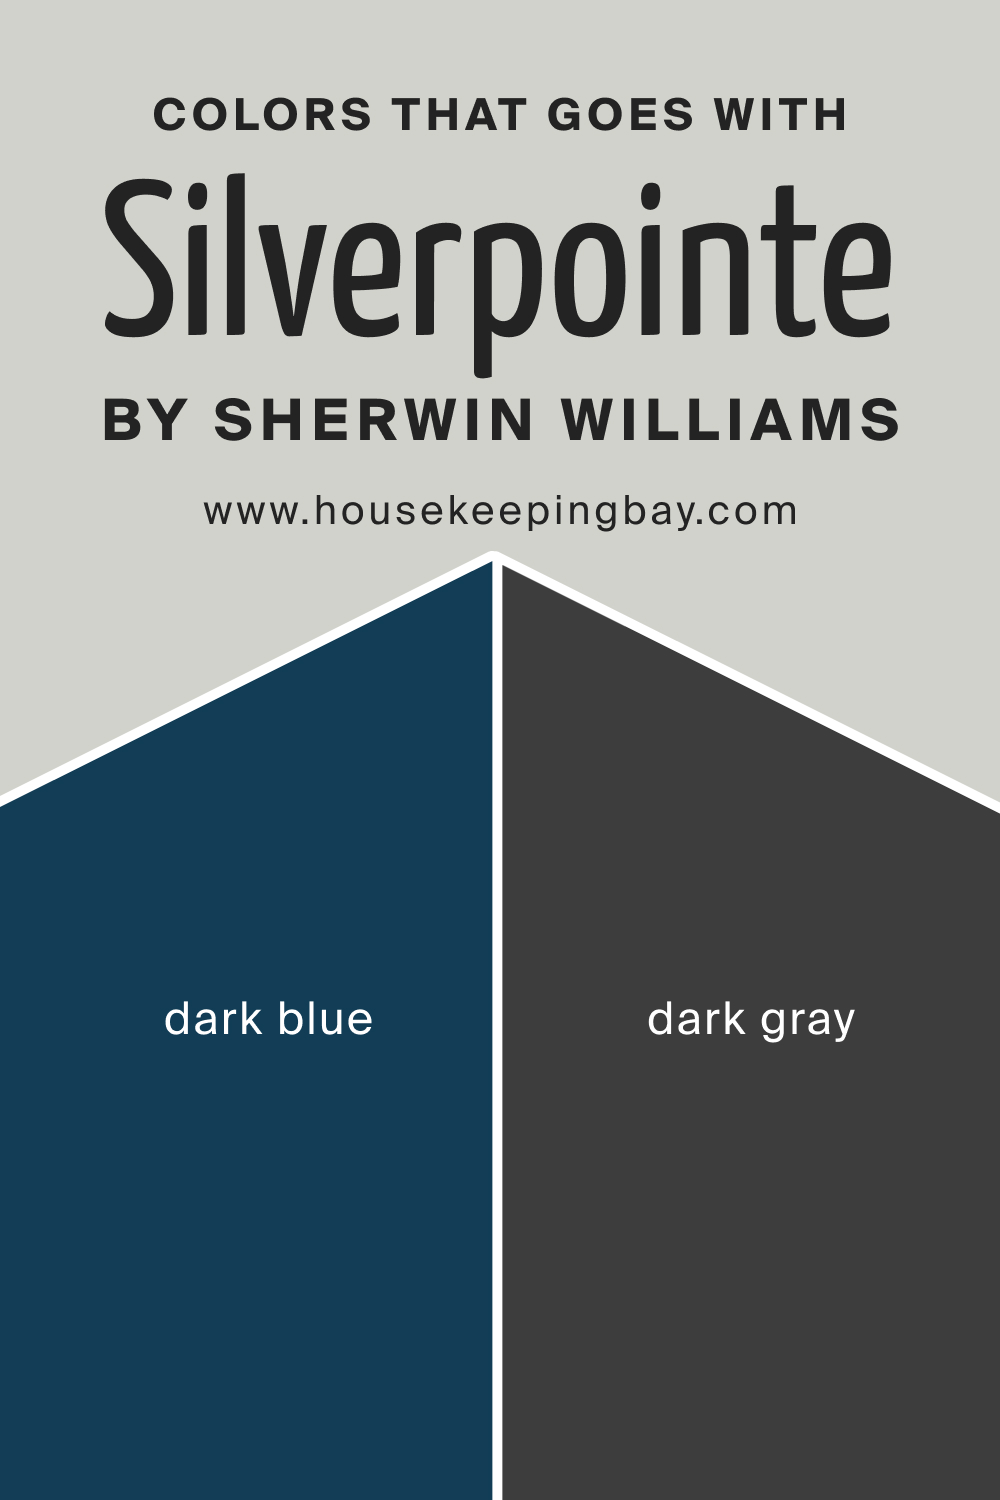 Colors that goes with SW Silverpointe by Sherwin Williams